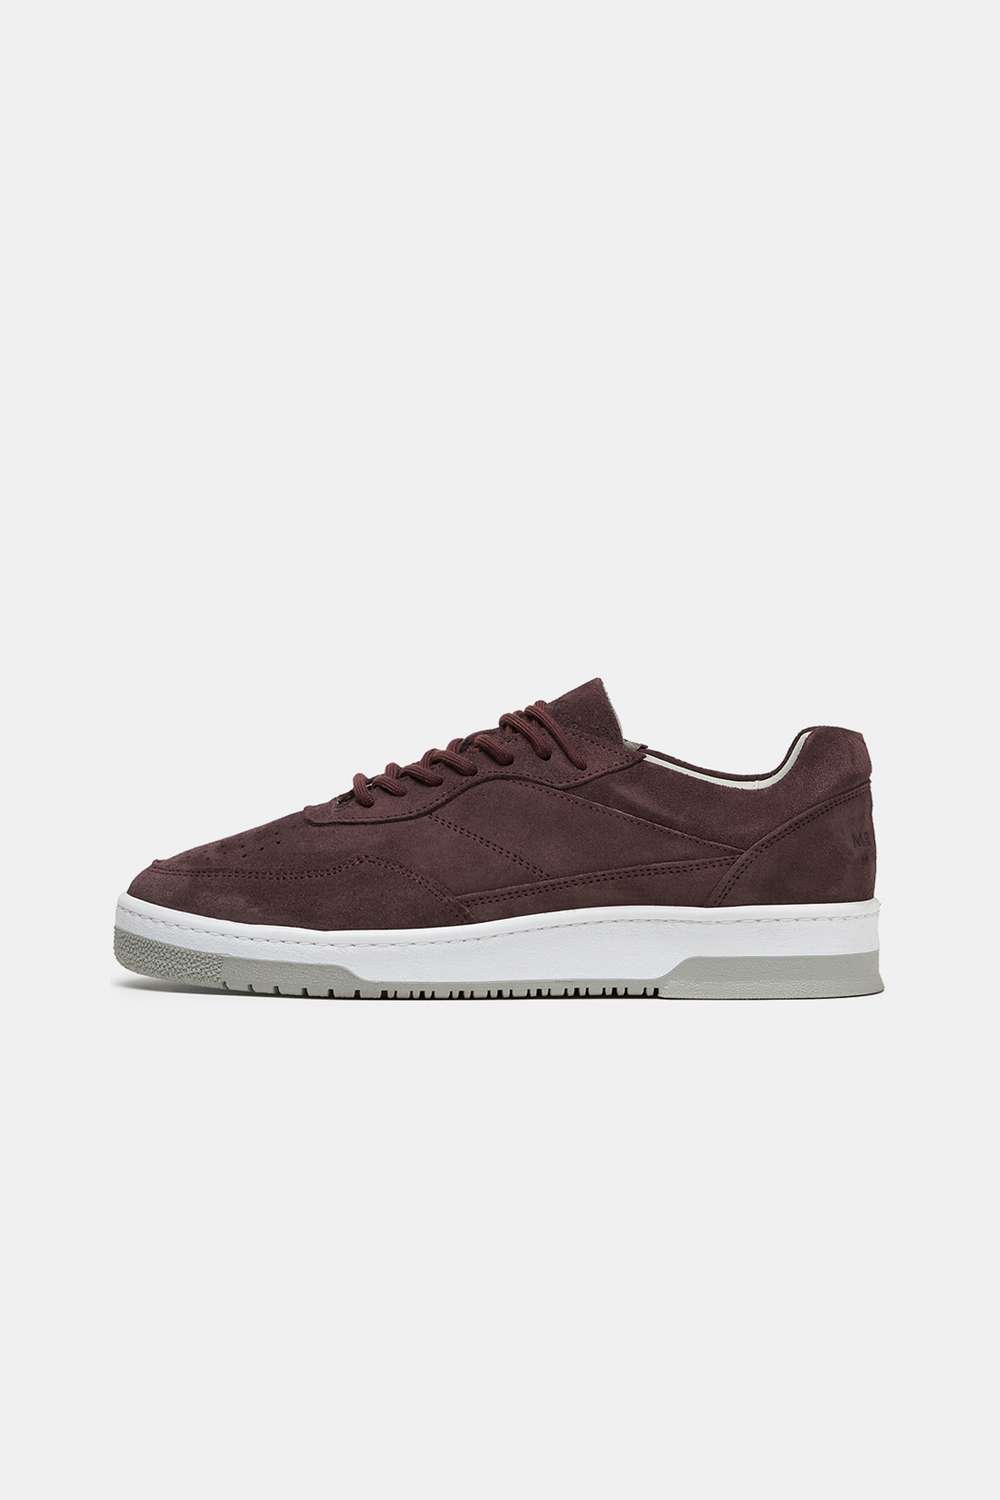 Reserves * The Suede Sneakers